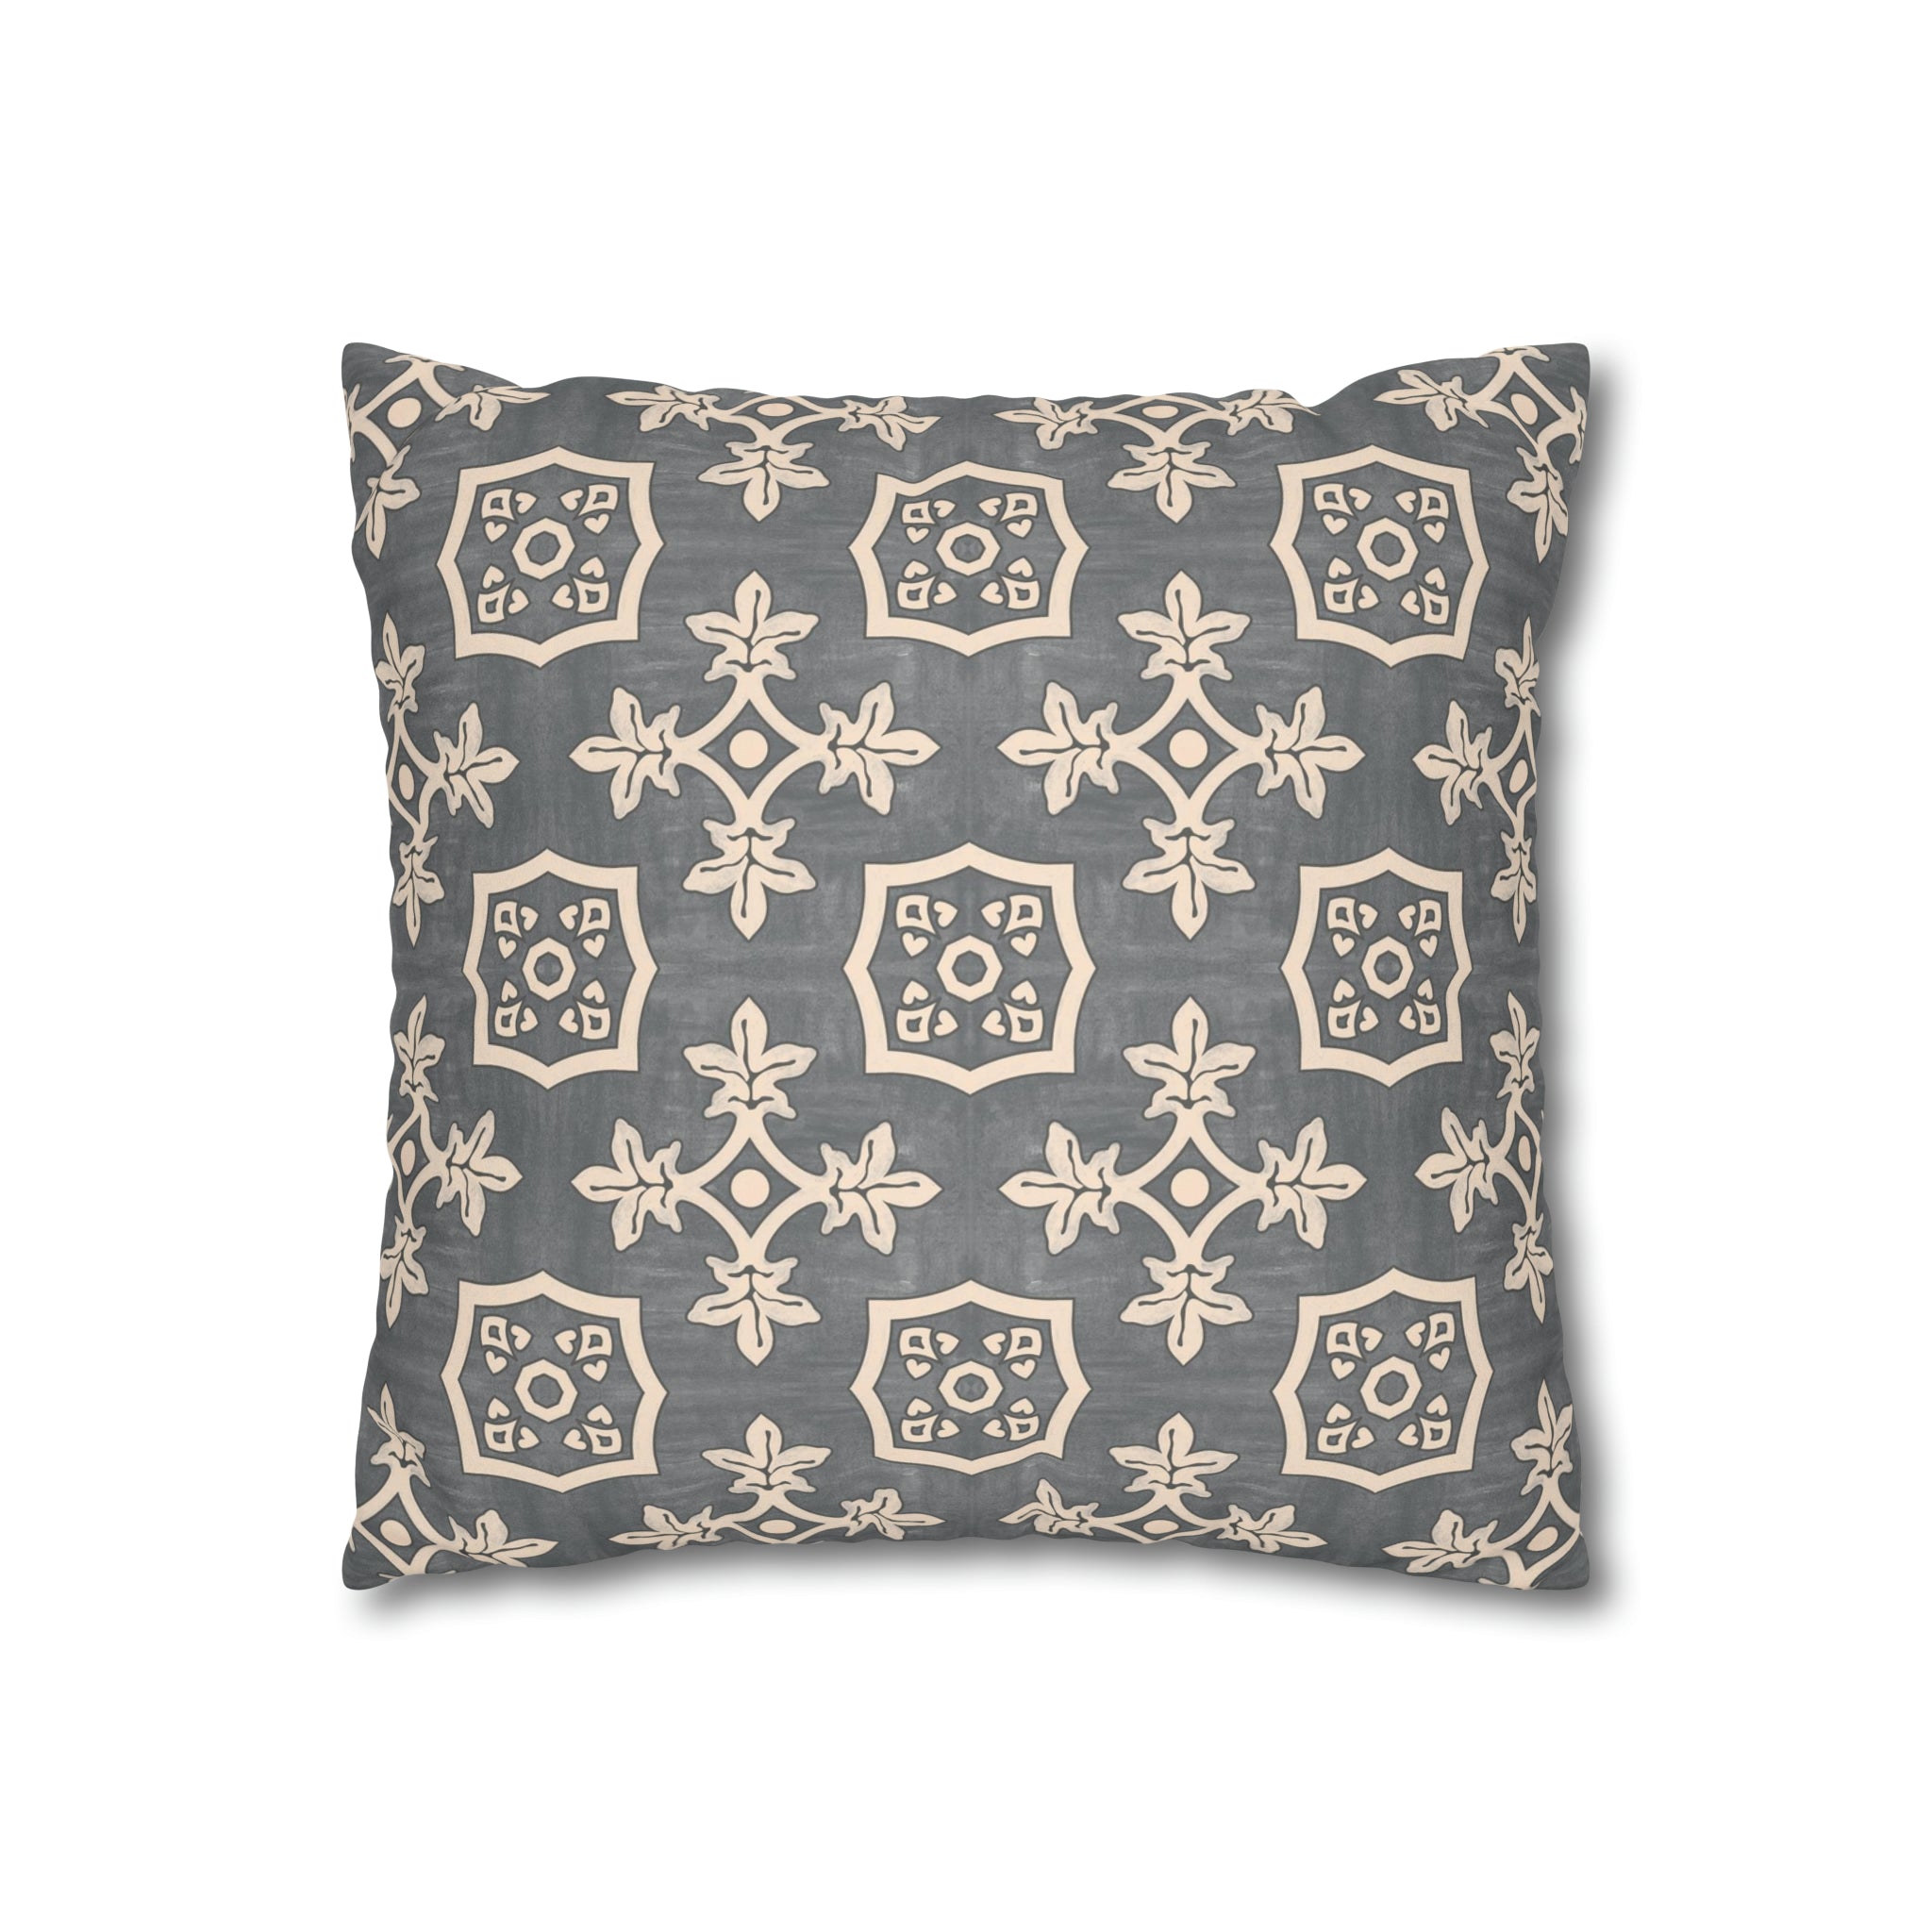 Palma Fonte Grey Microsuede Square Pillow Cover